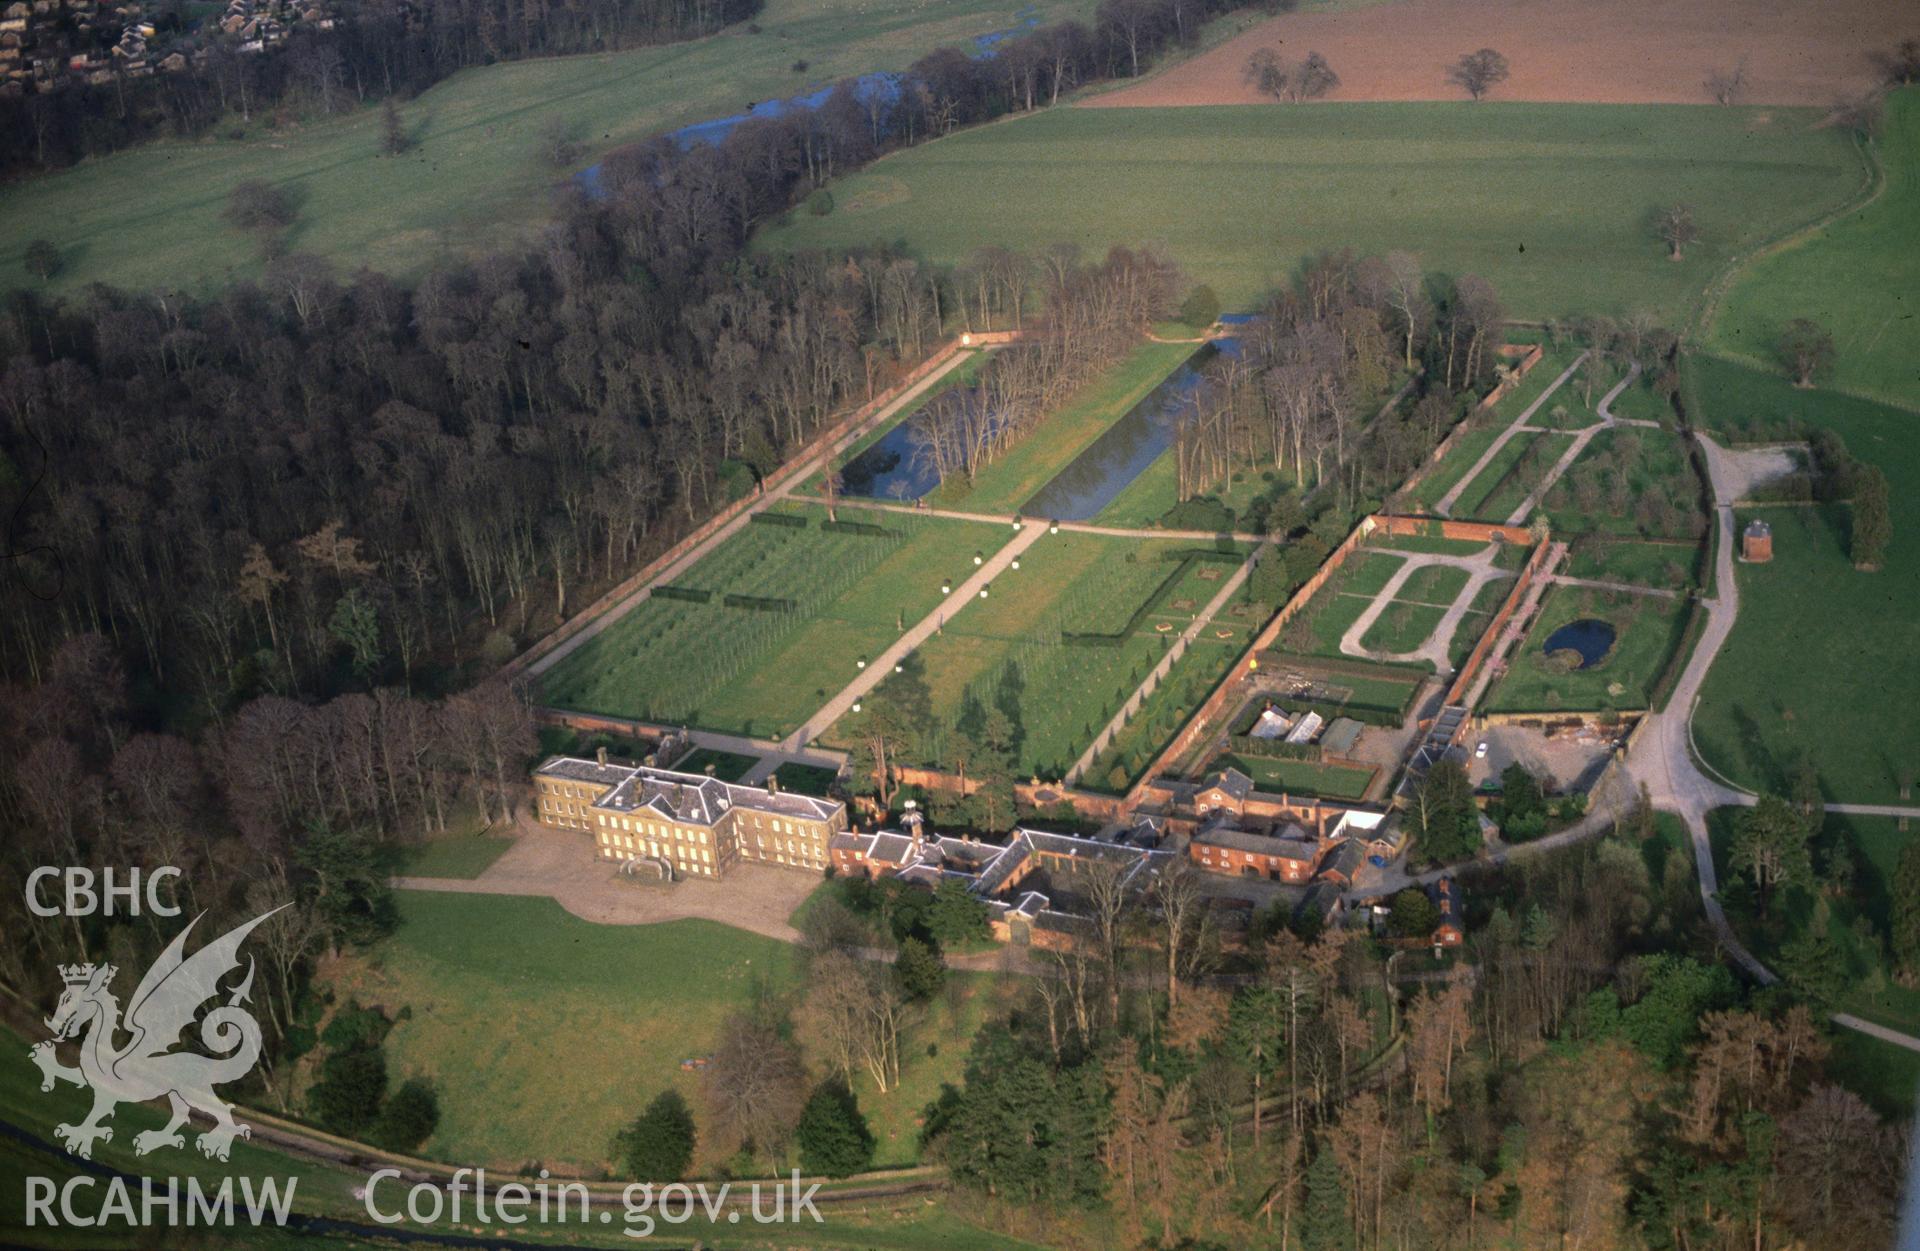 Slide of RCAHMW colour oblique aerial photograph of Erddig Hall, taken by C.R. Musson, 12/3/1990.